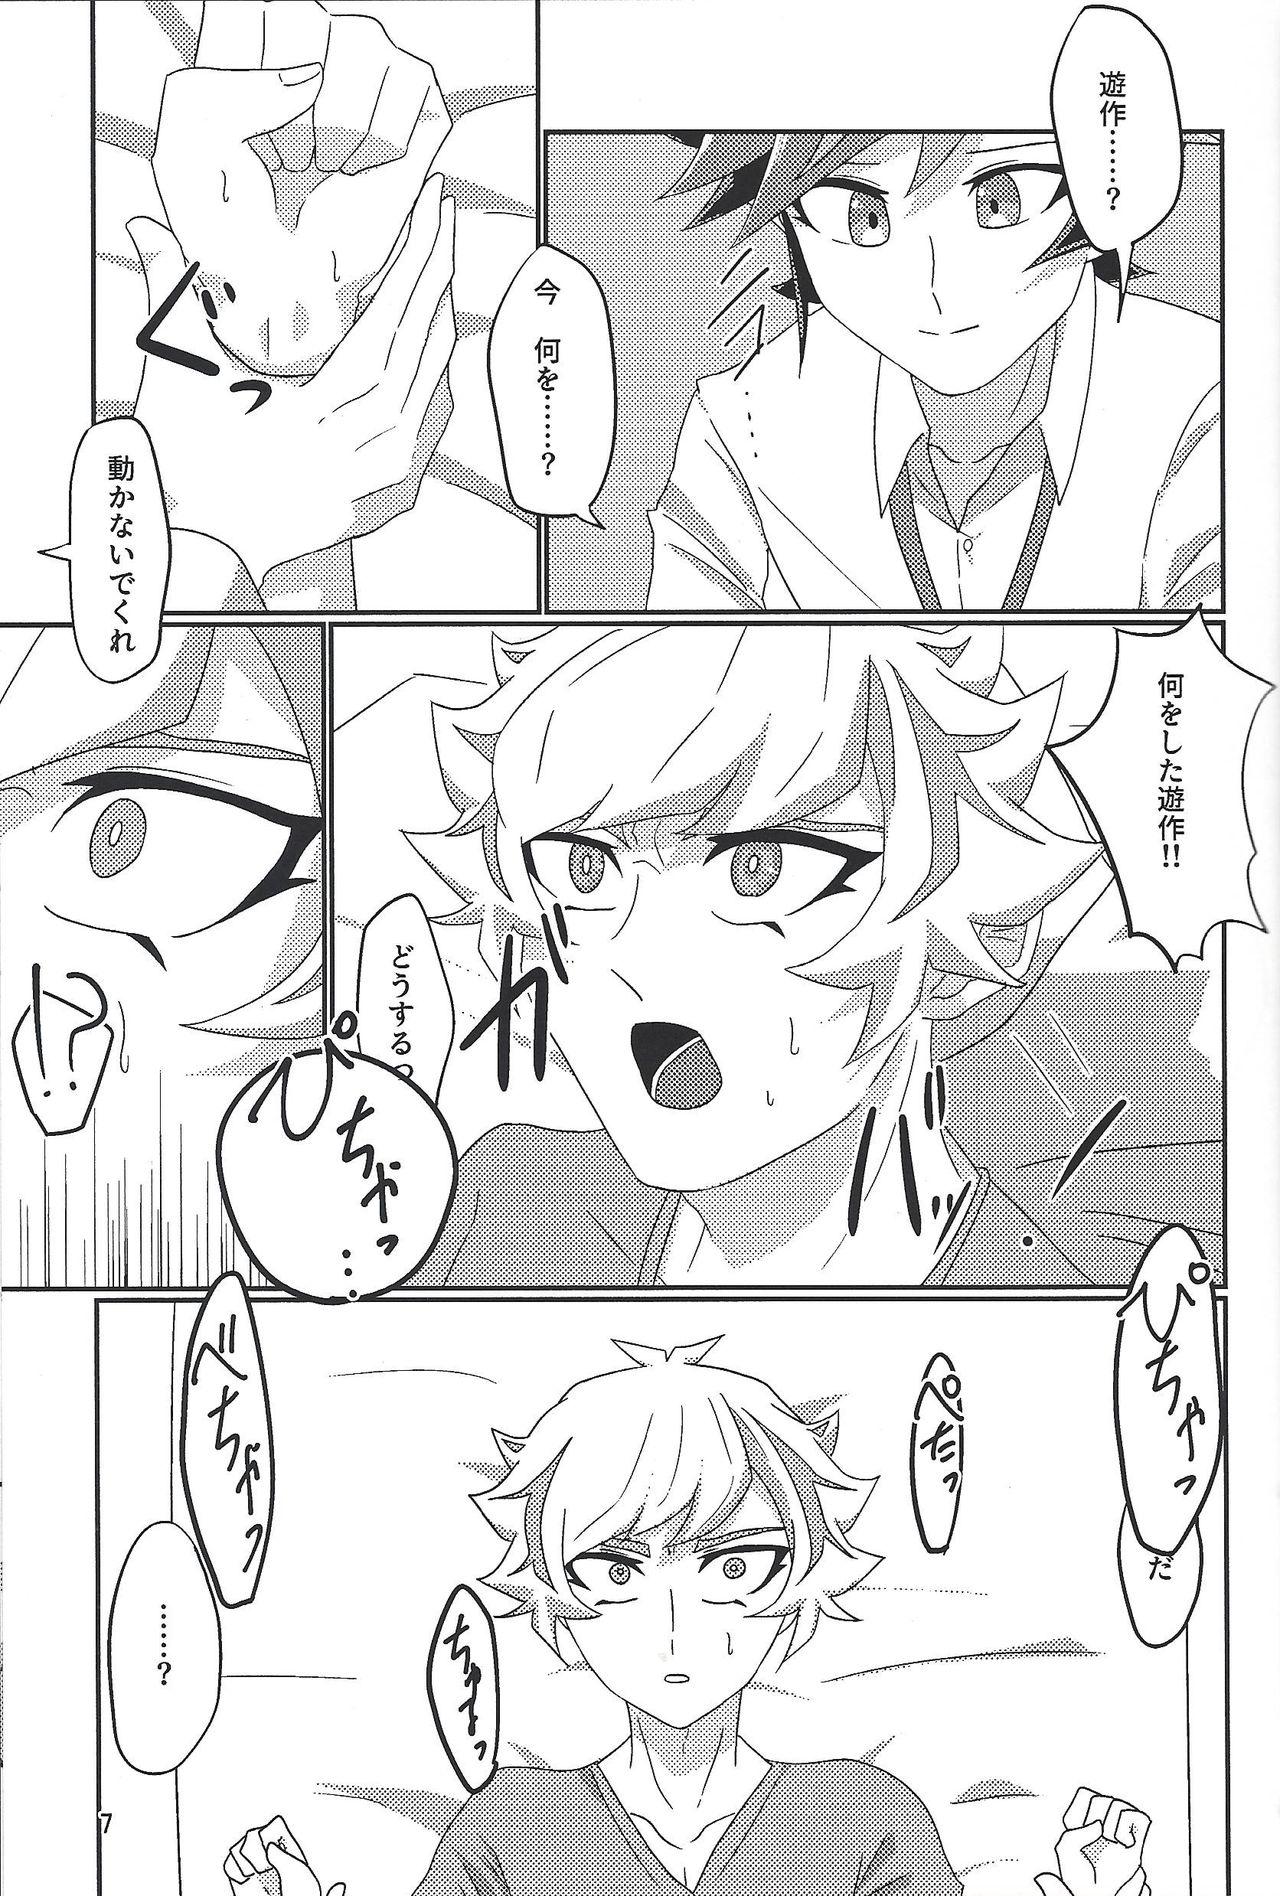 Groping In my Brain - Yu-gi-oh vrains This - Page 6